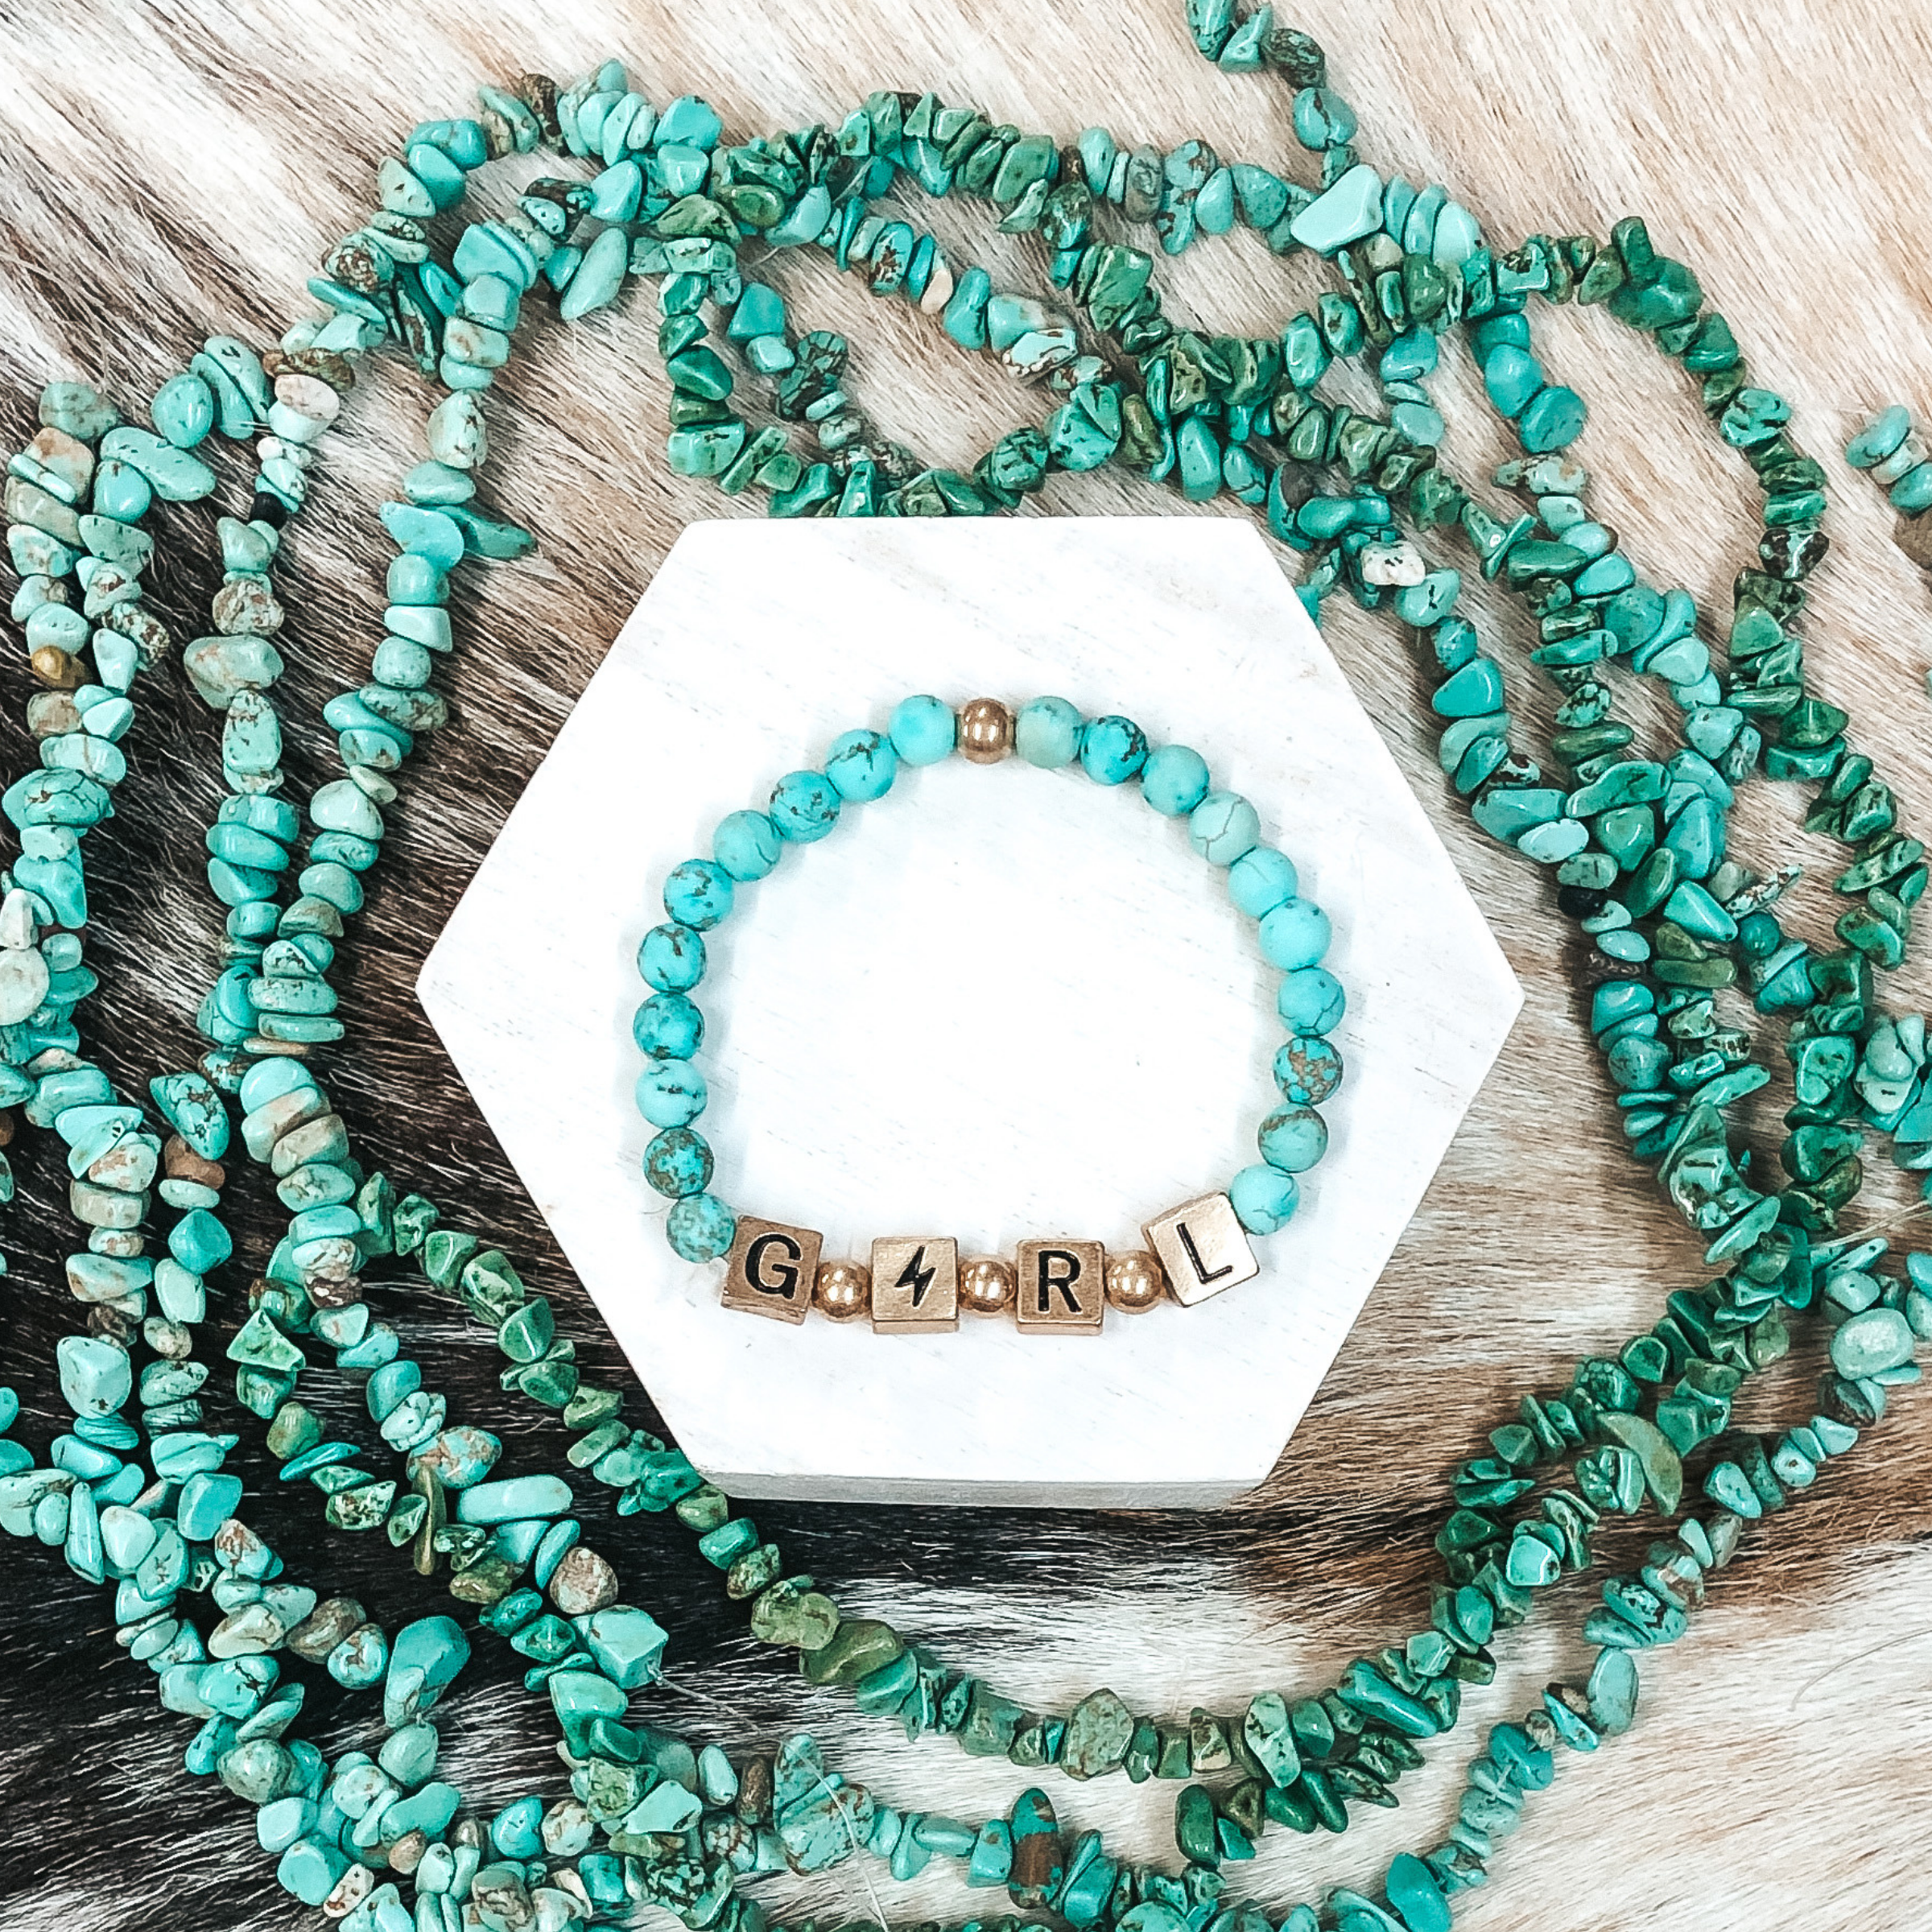 Girl Power Bracelet in Turquoise - Giddy Up Glamour Boutique